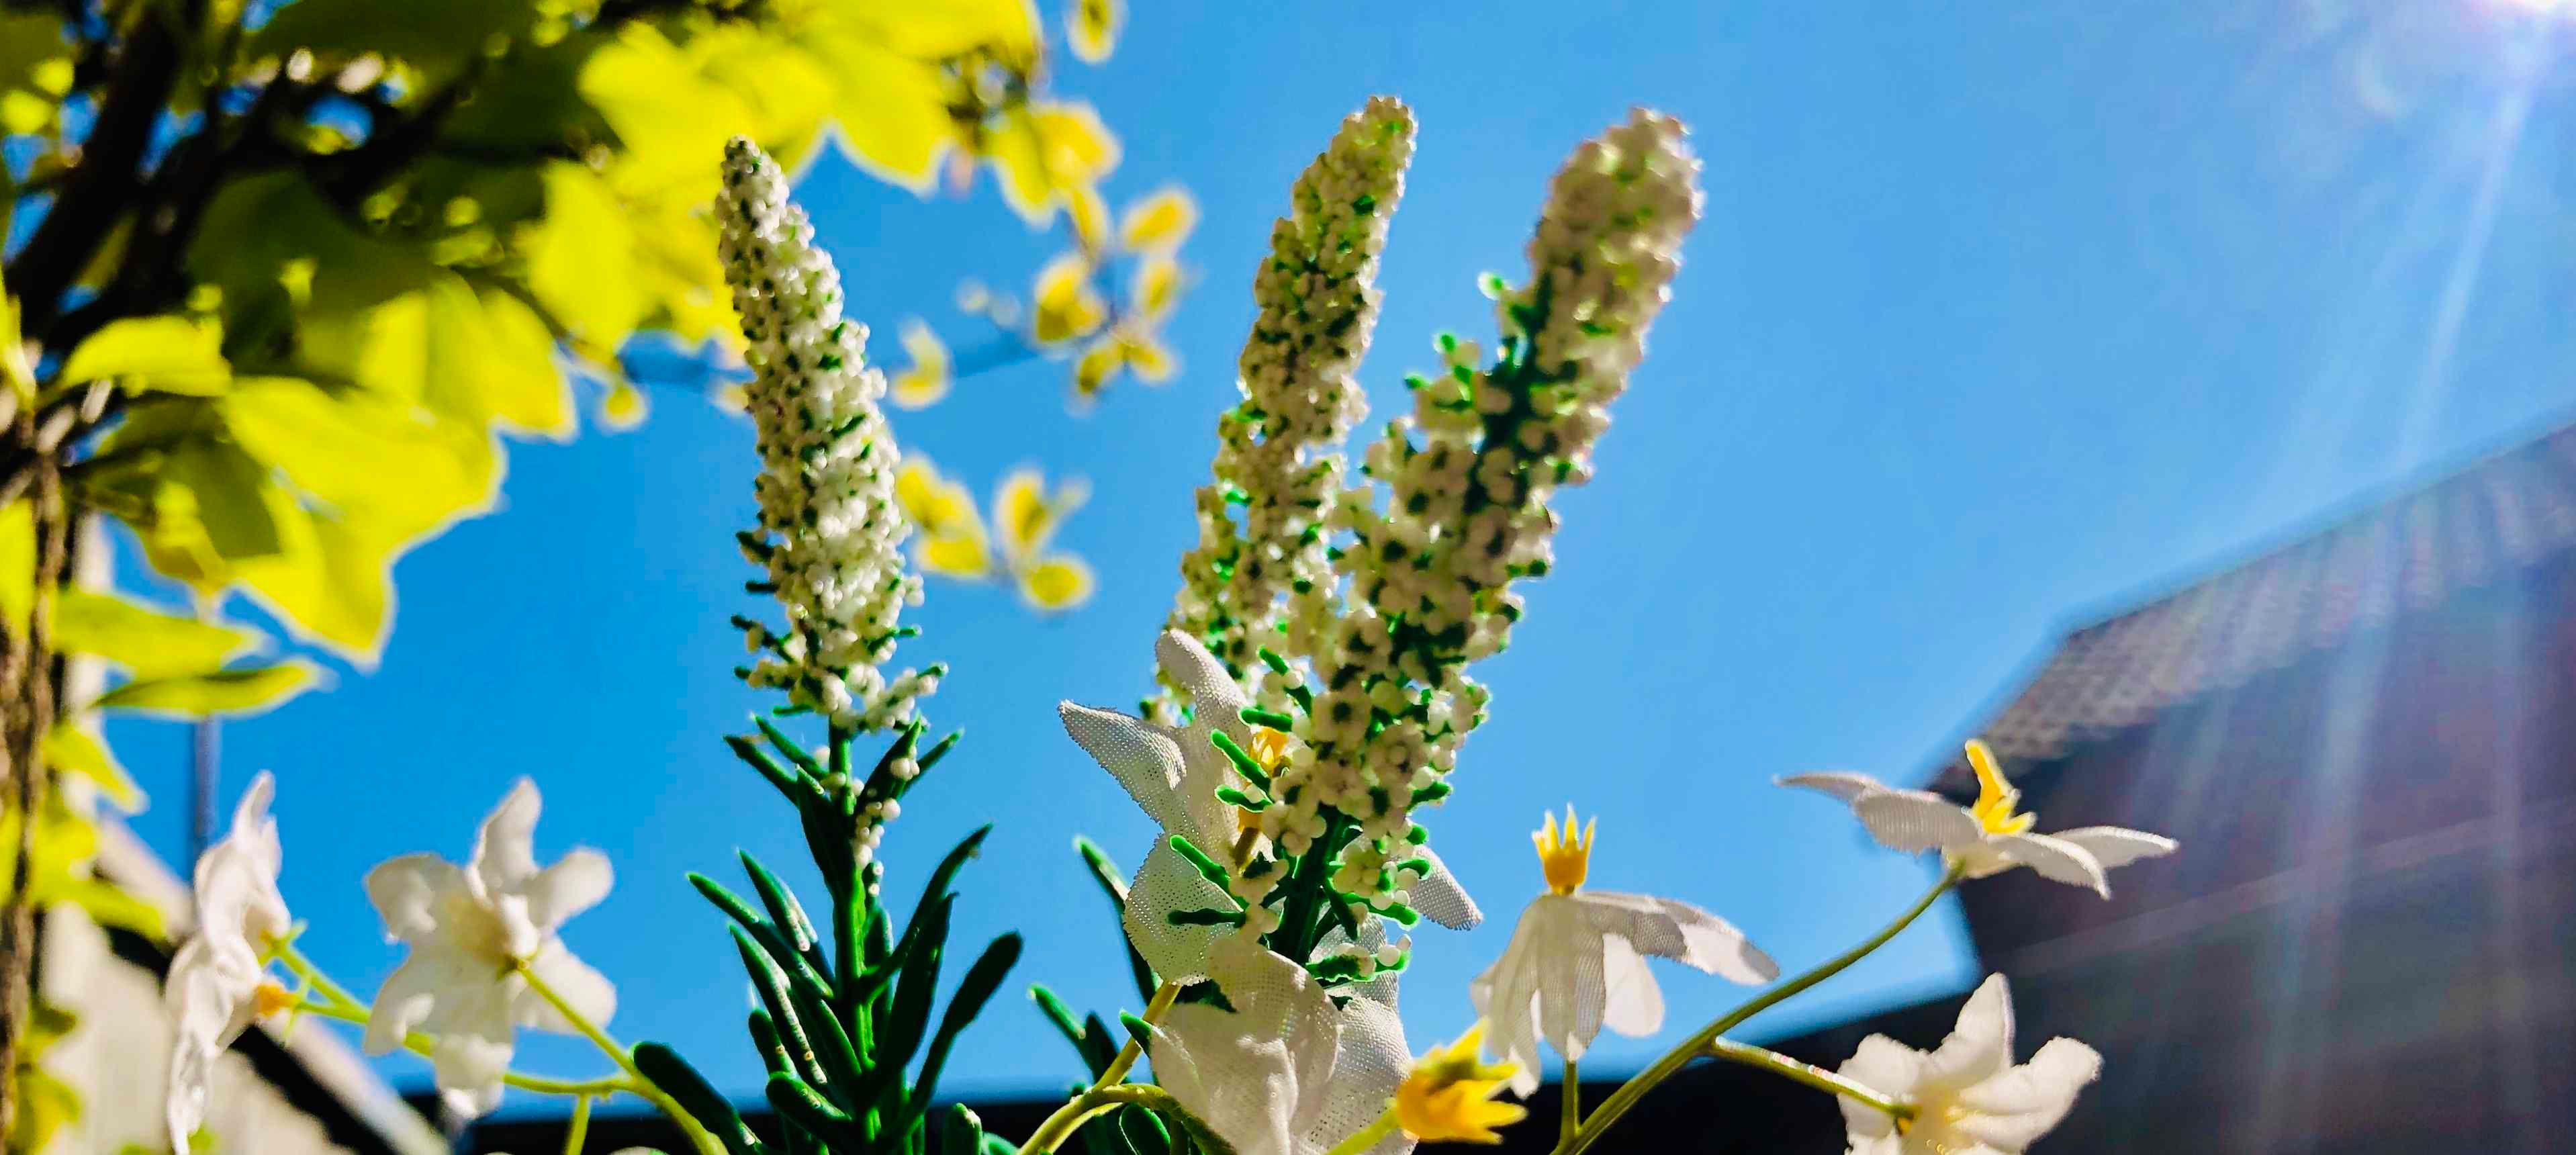 White flowers in the sun with blue sky